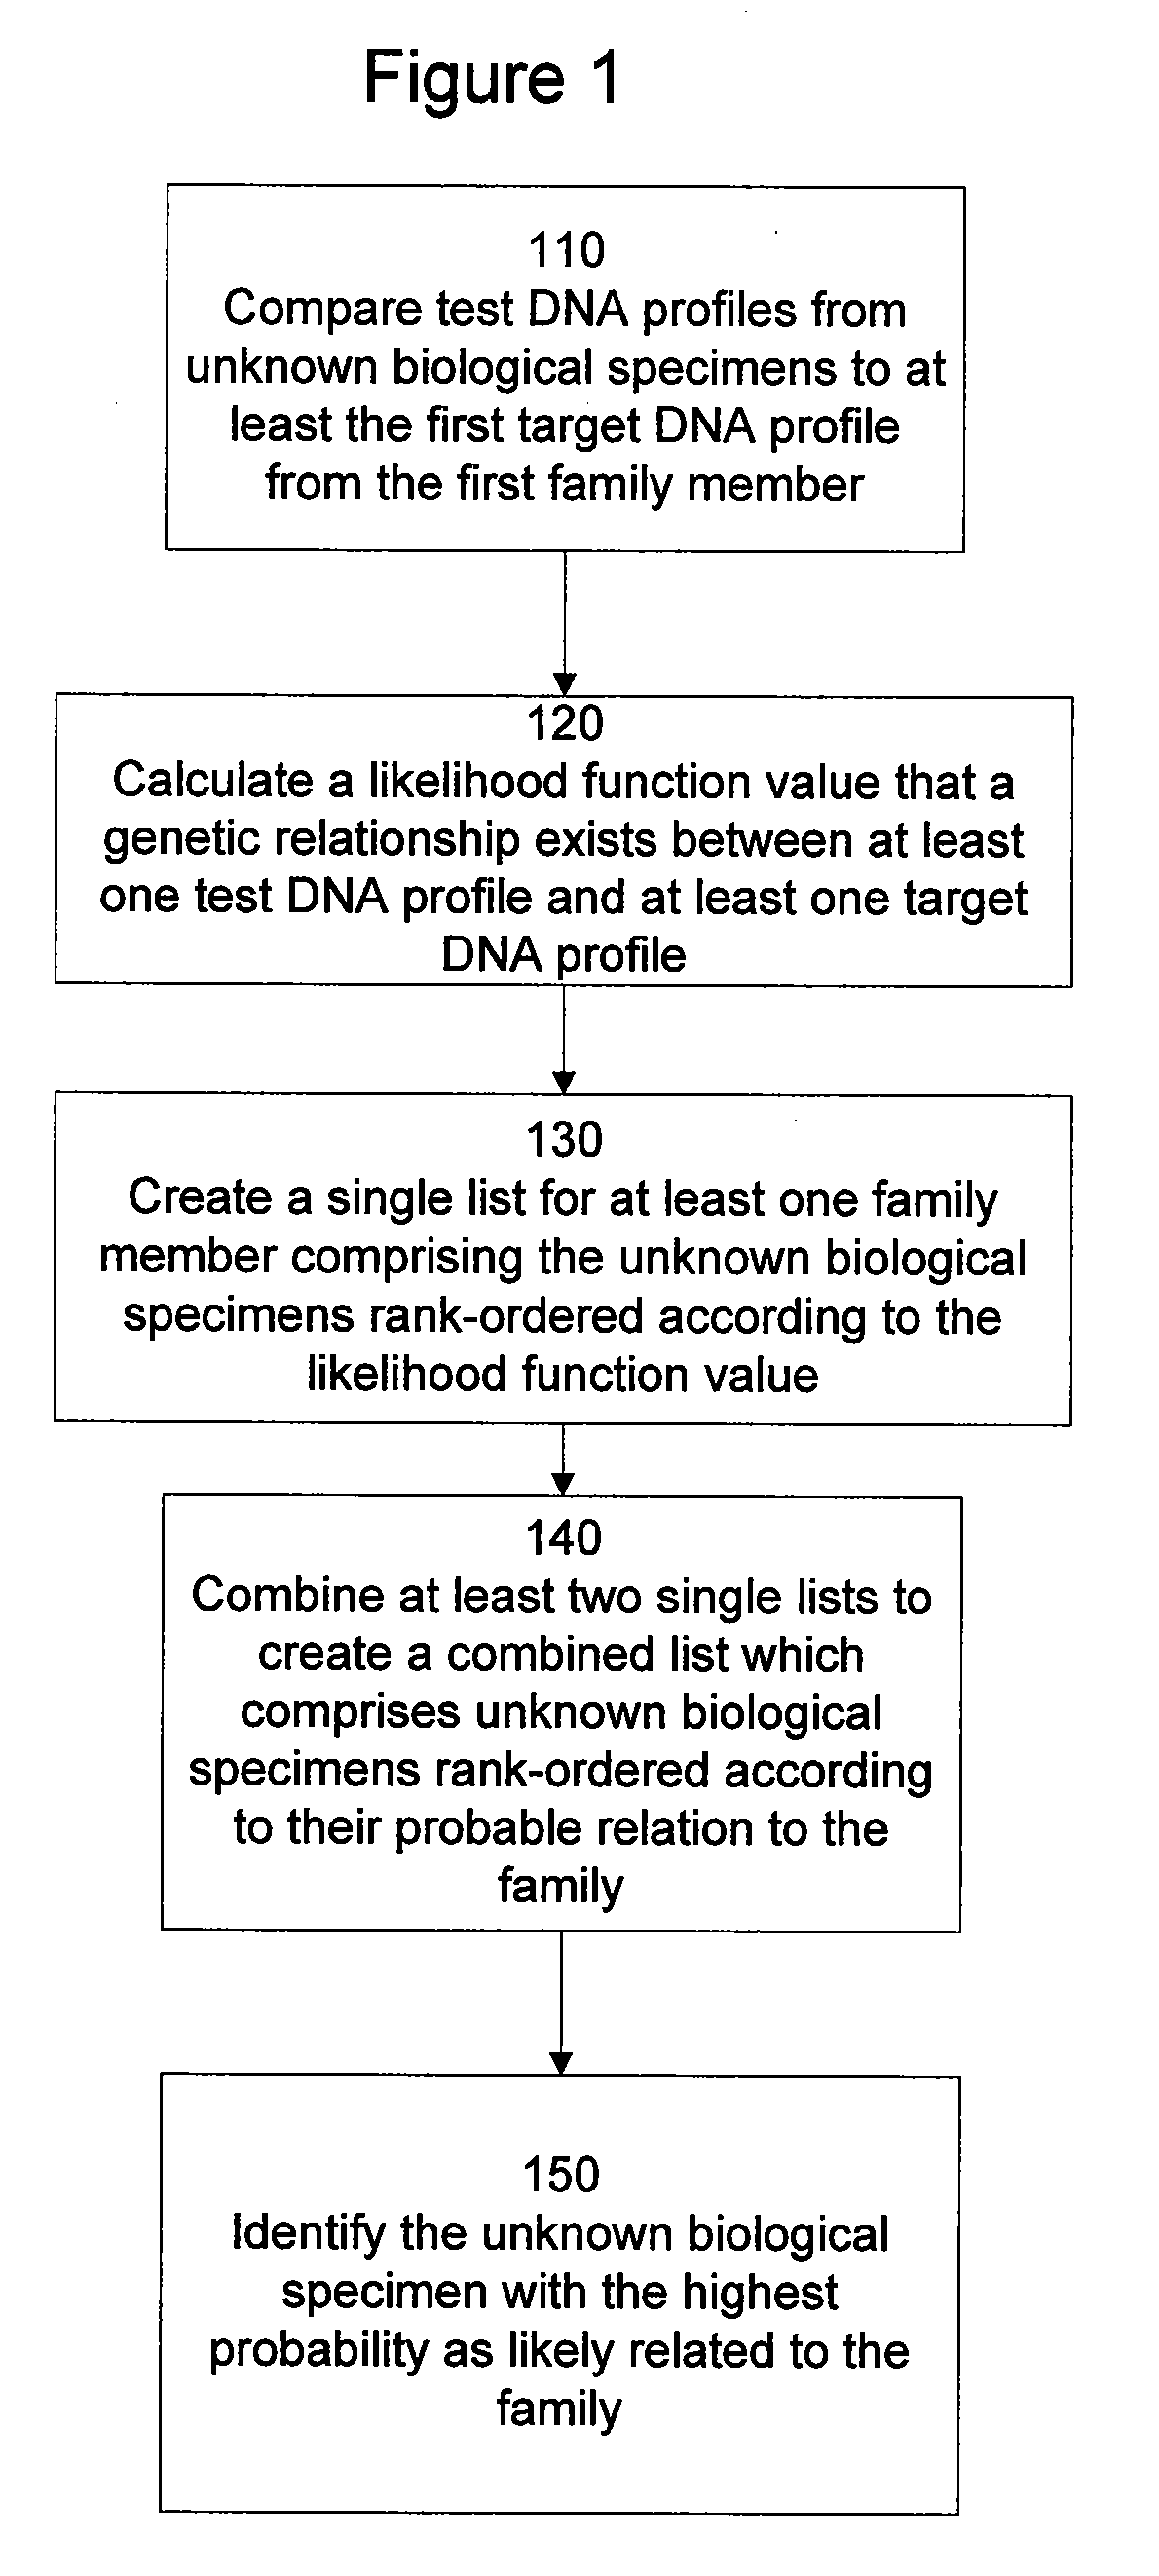 Methods of associating an unknown biological specimen with a family